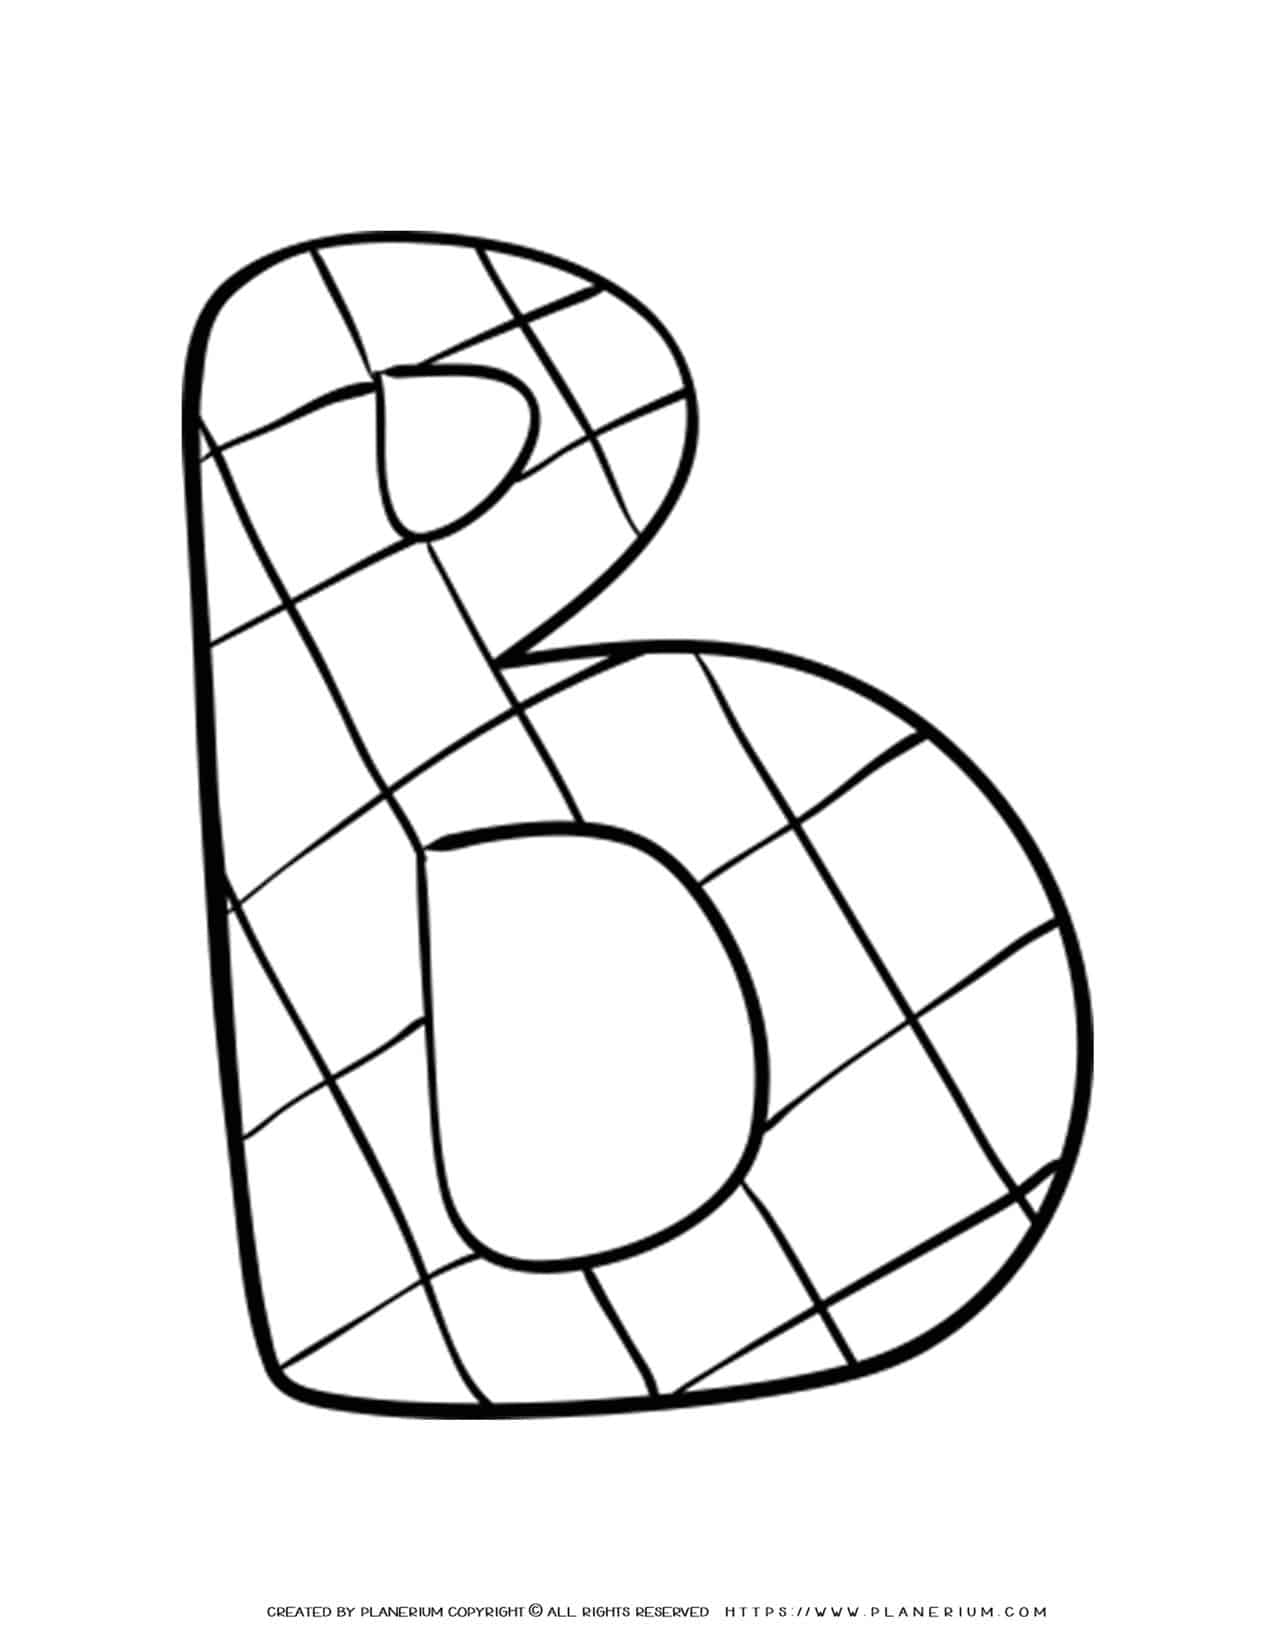 English Alphabet - Capital B with Pattern - Coloring Page | Planerium